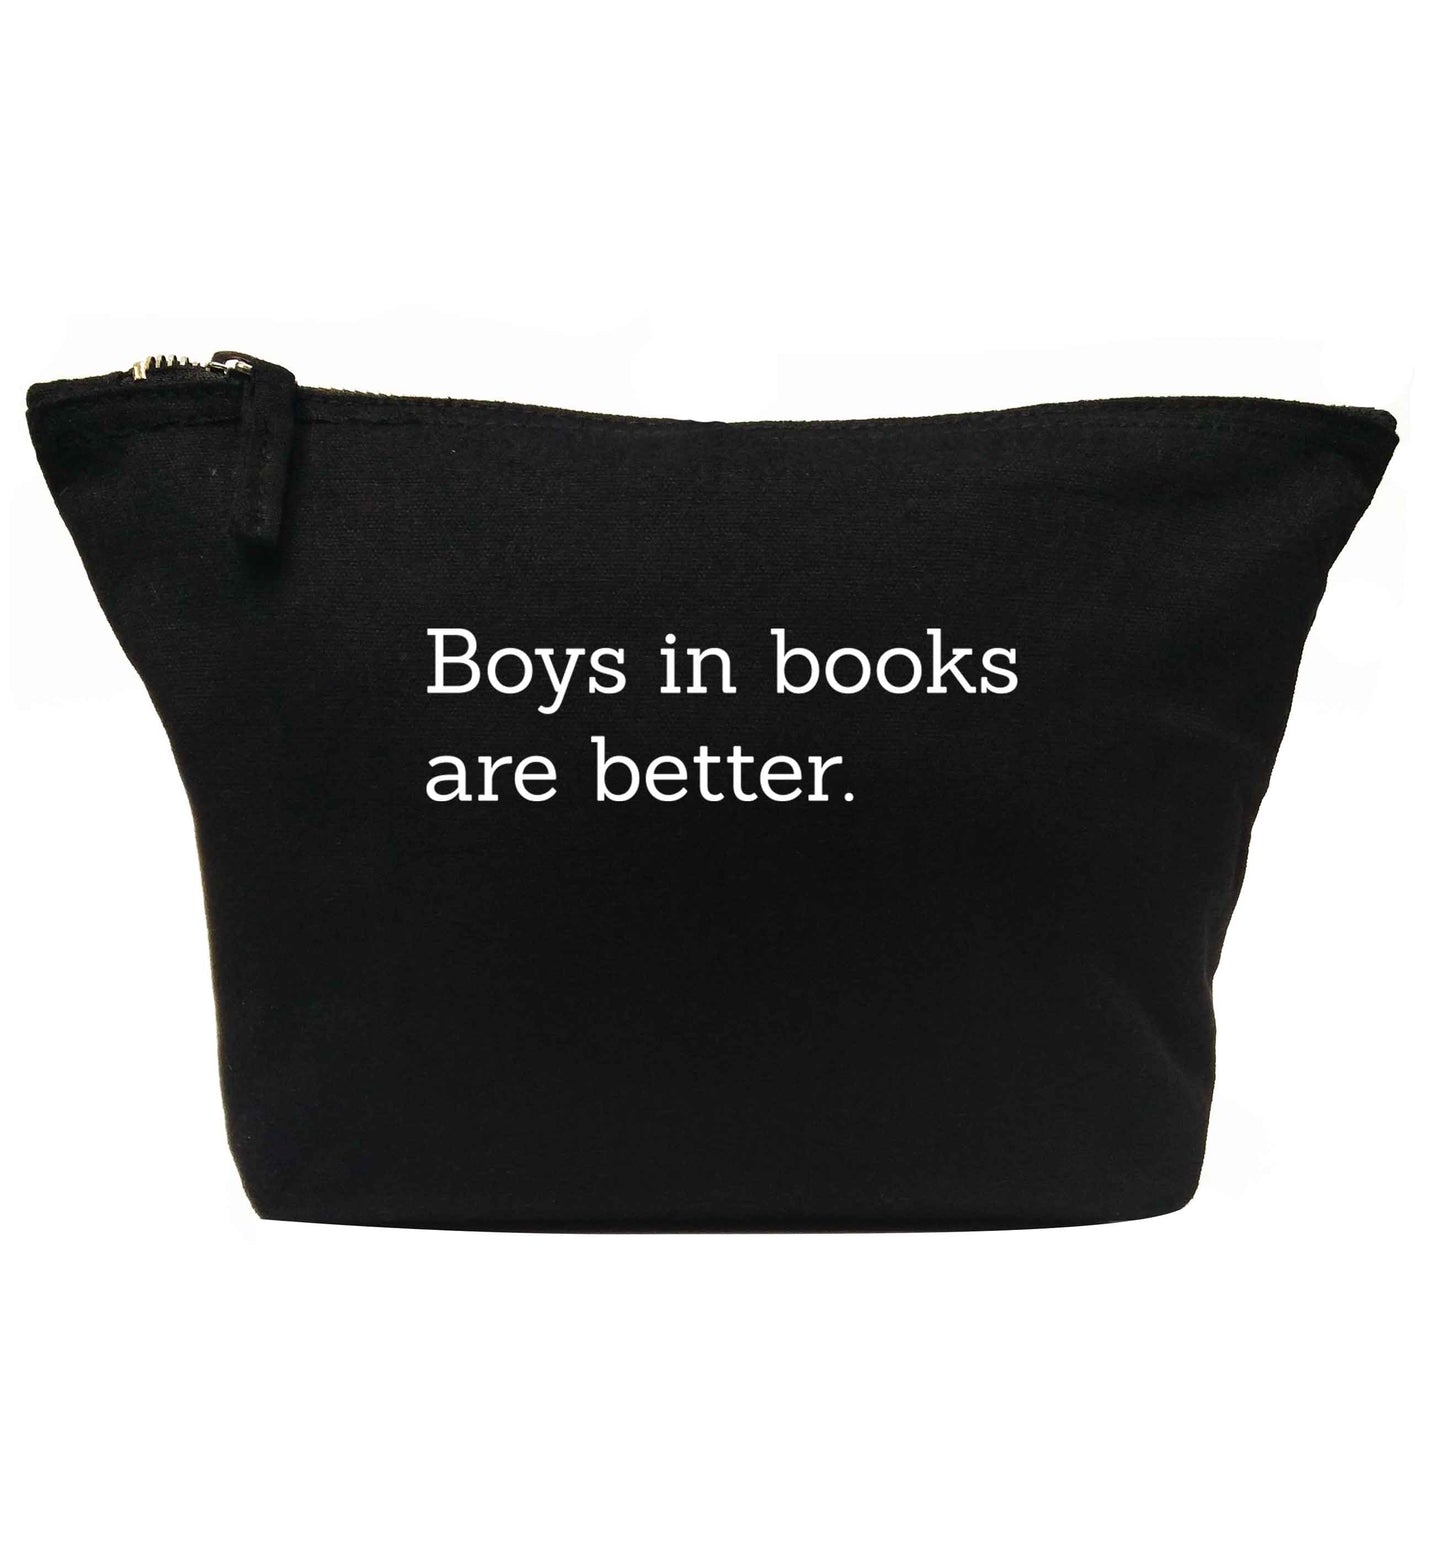 Boys in books are better | Makeup / wash bag